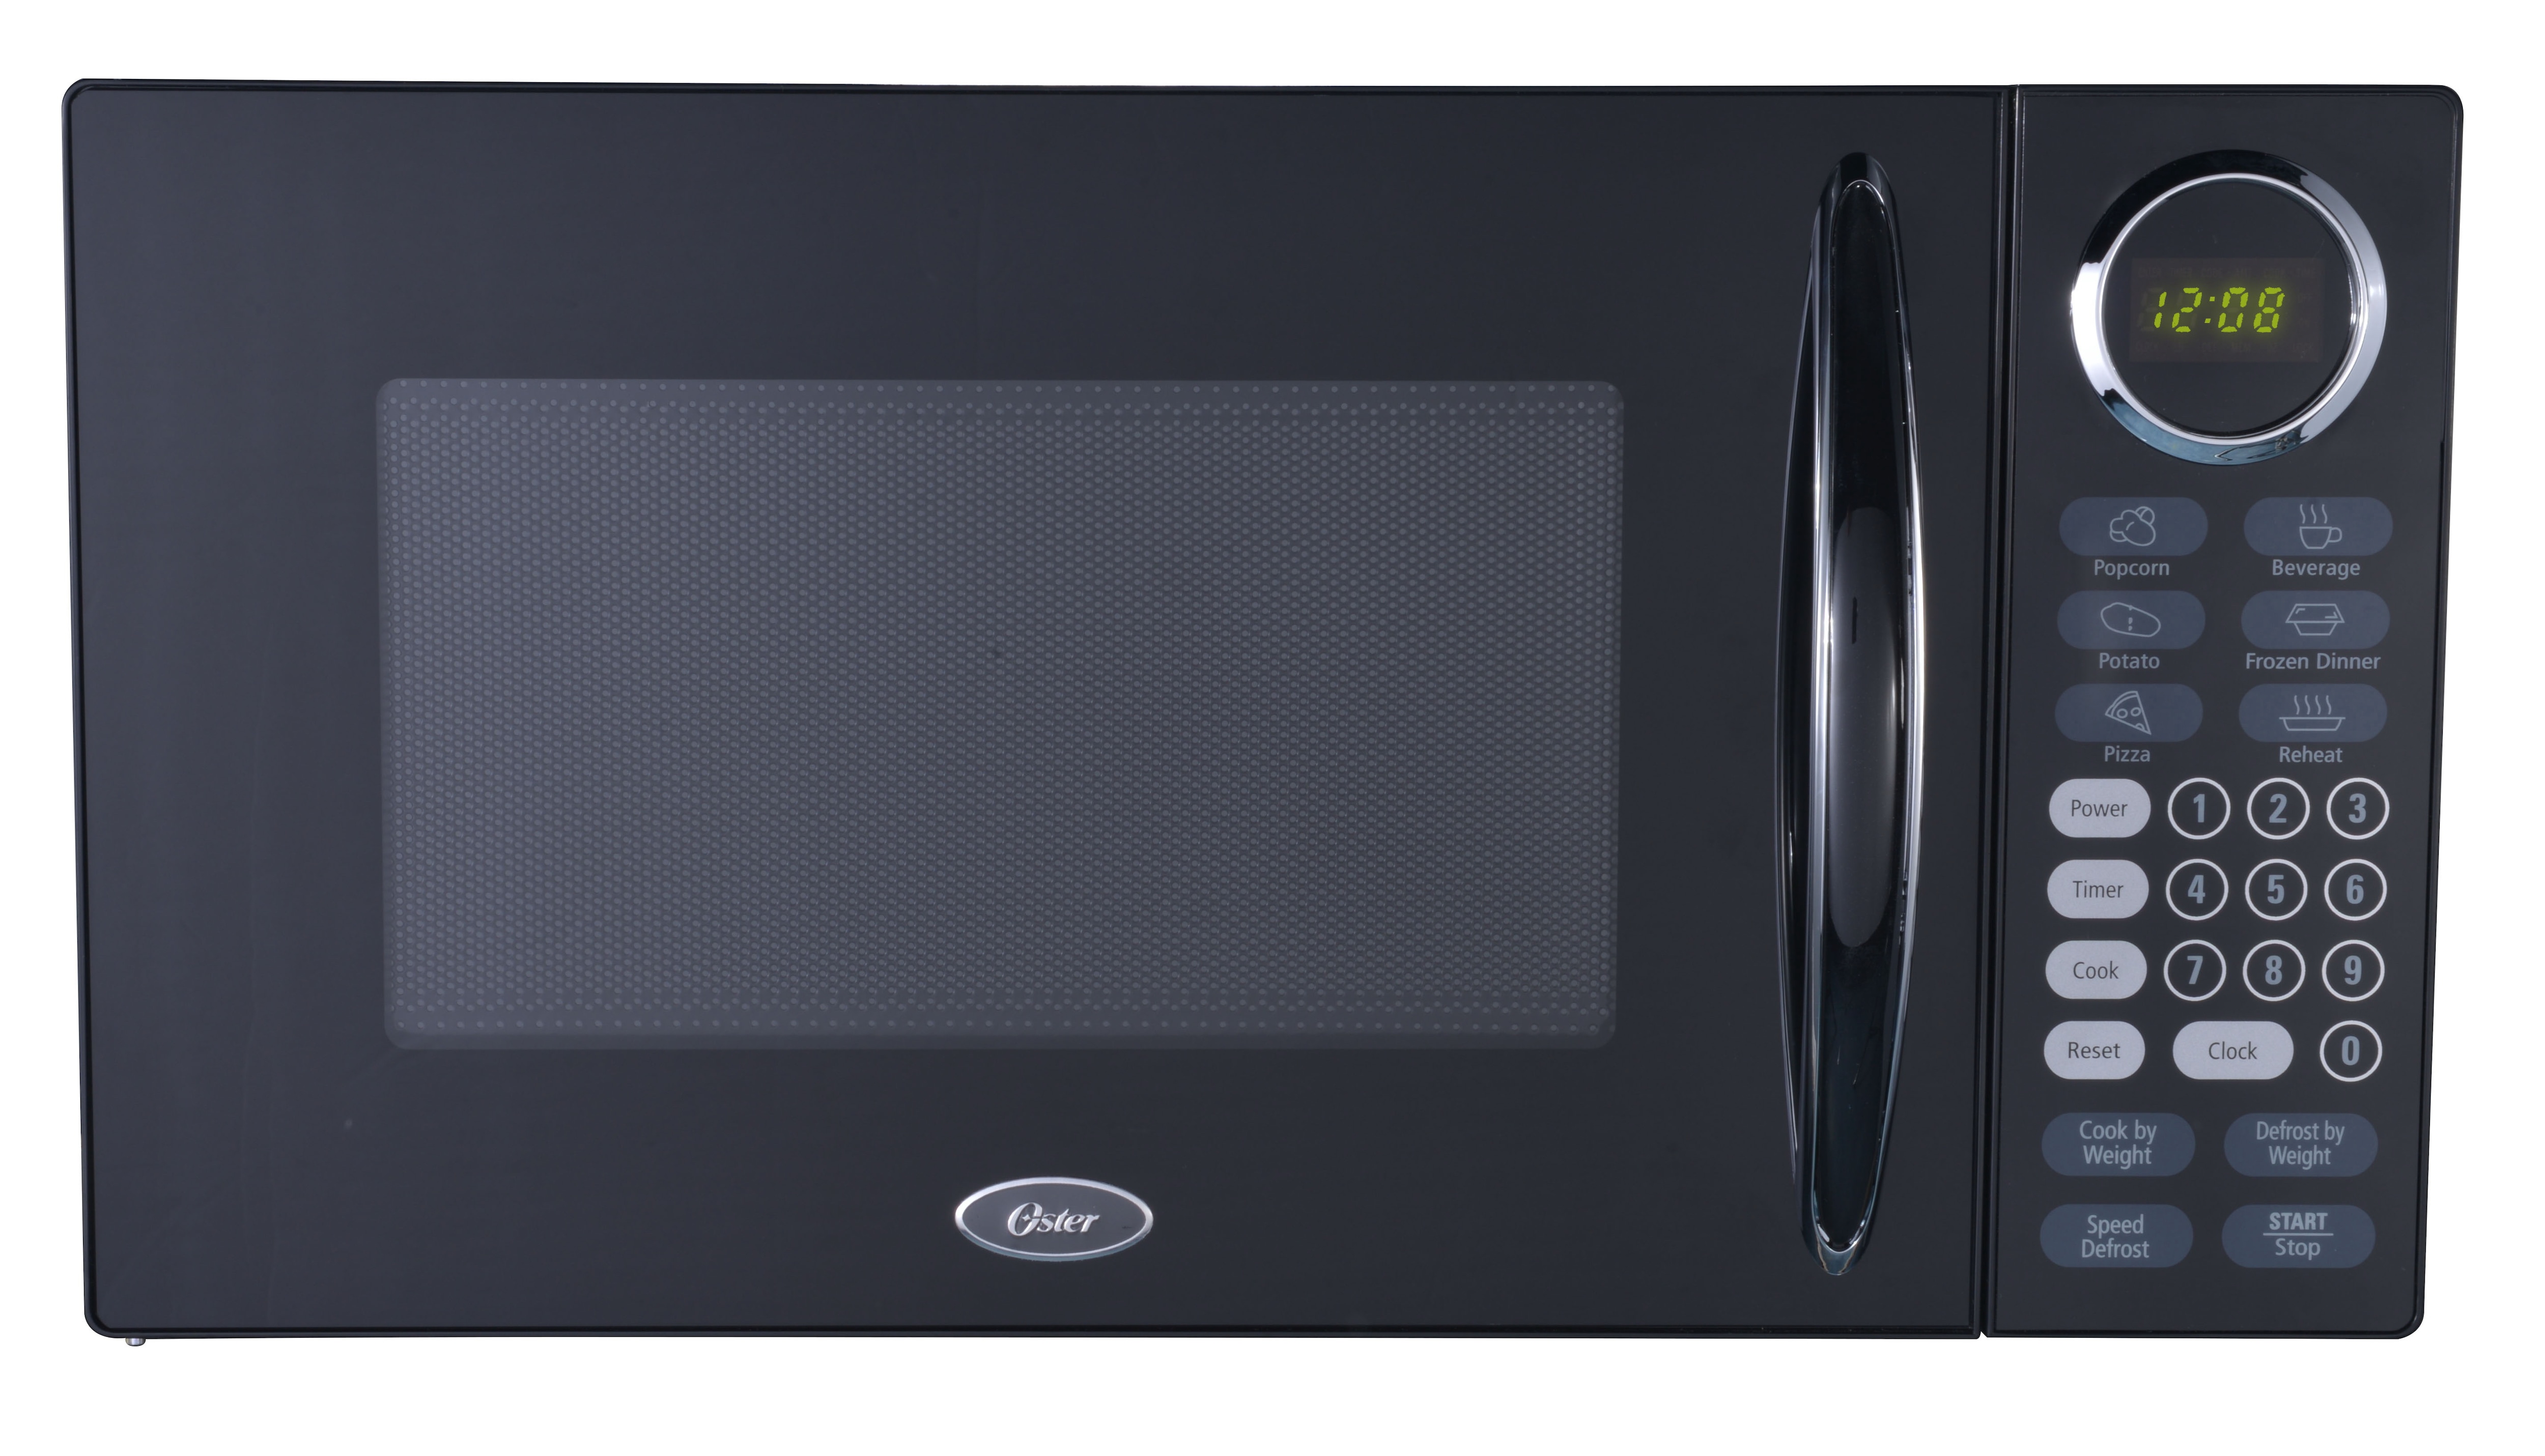 Oster 0.9 Cu. Ft. Digital Microwave Oven, Atg Archive